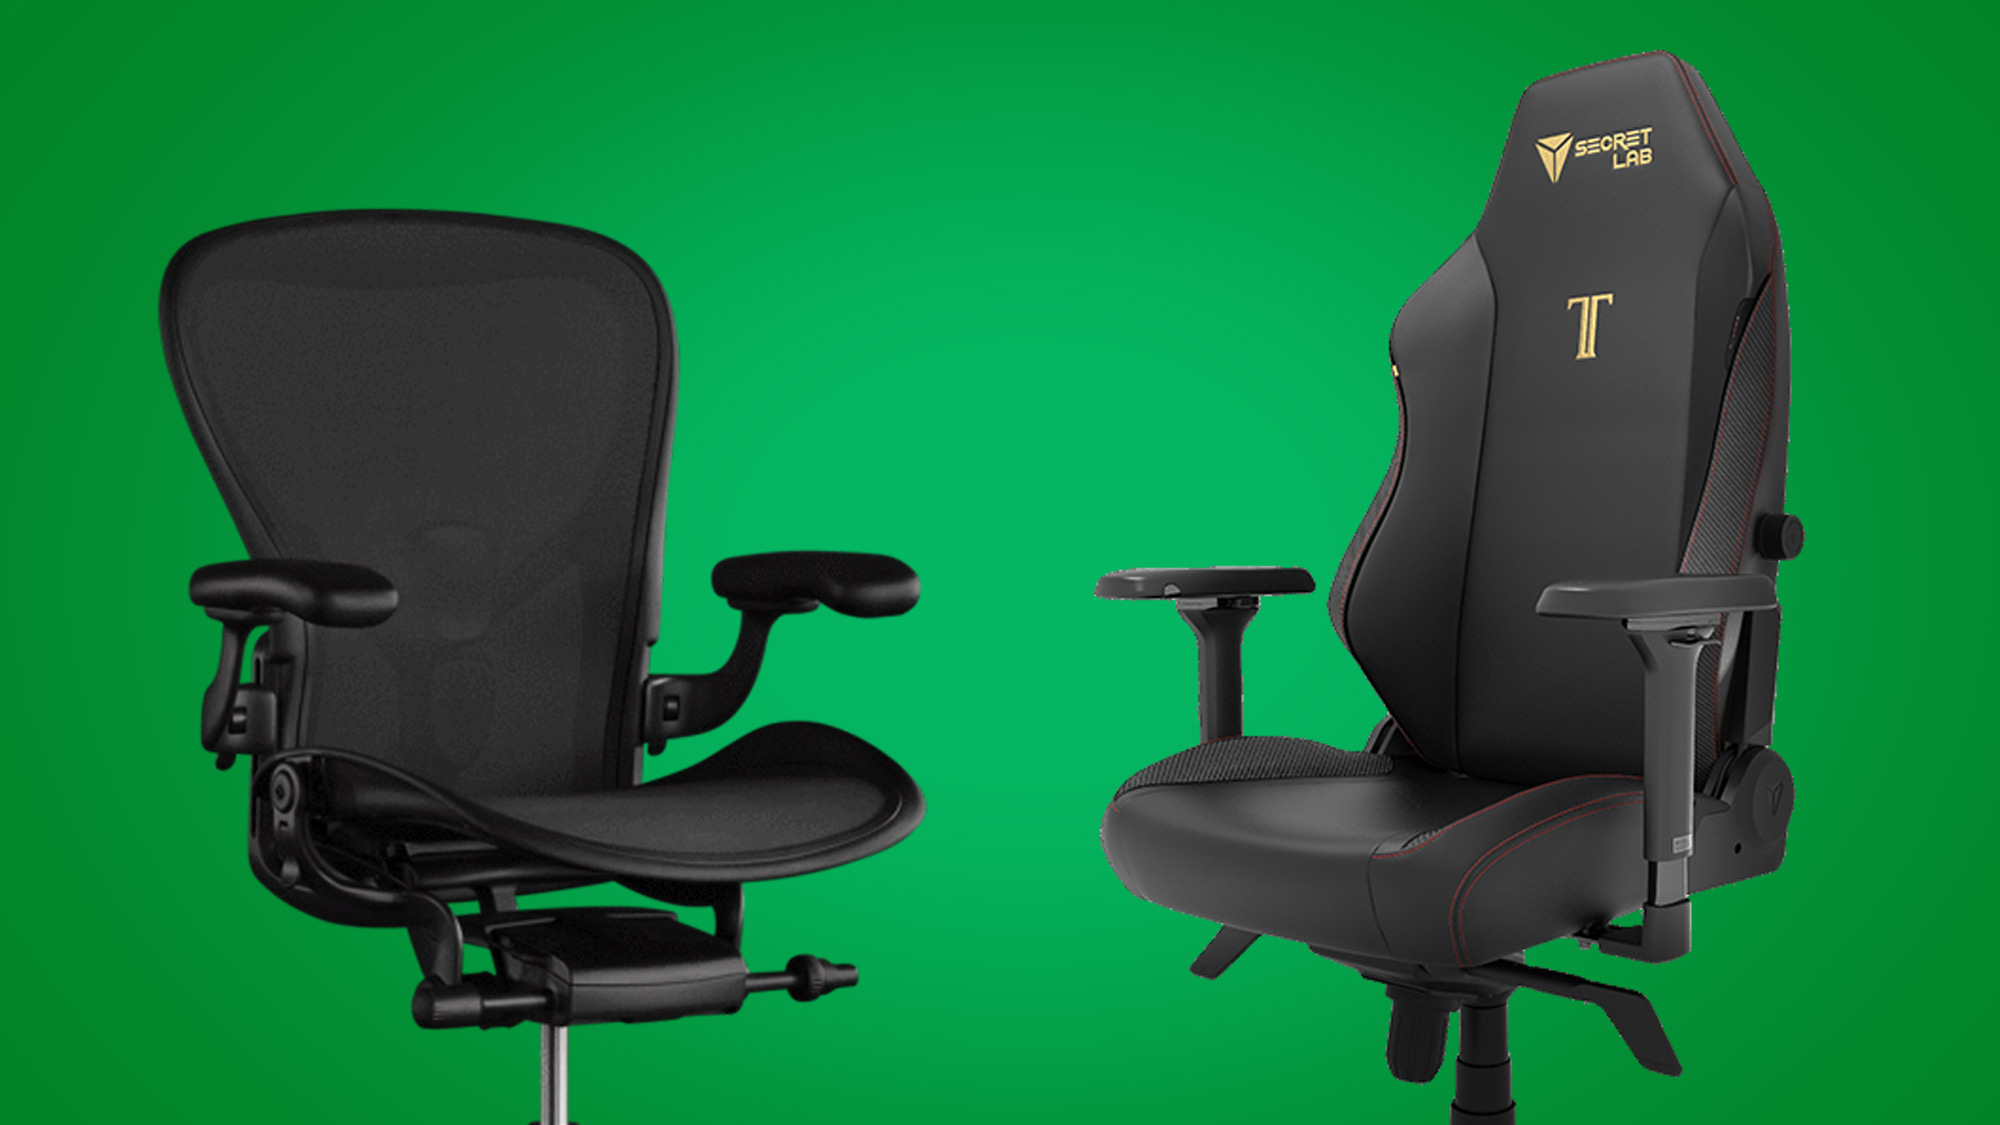 Gaming chair vs office chair: which seat type is best? | GamesRadar+